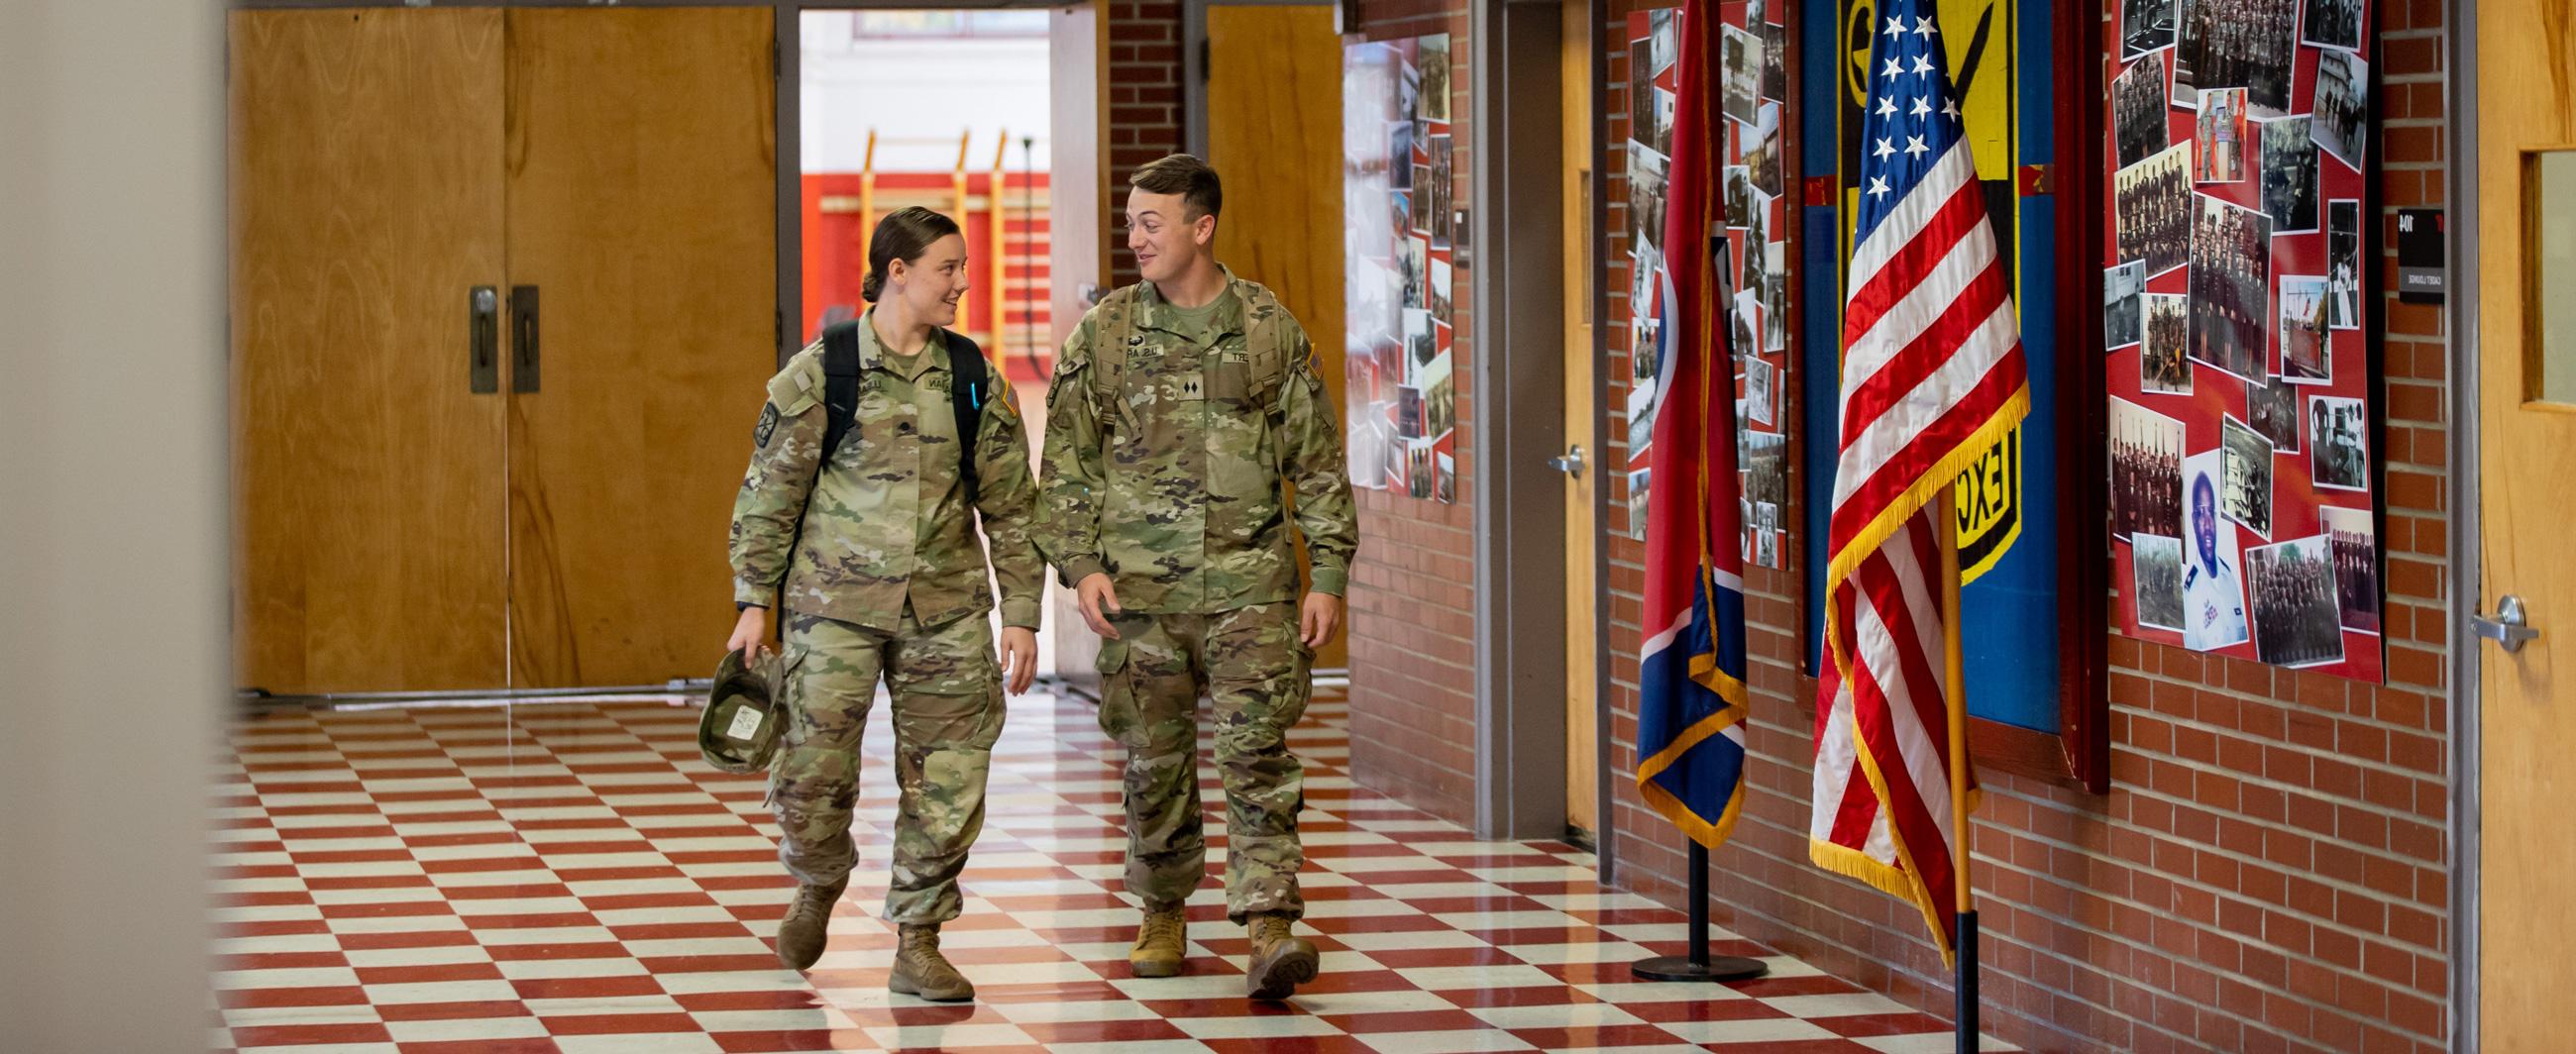 Military students walking down the hallway